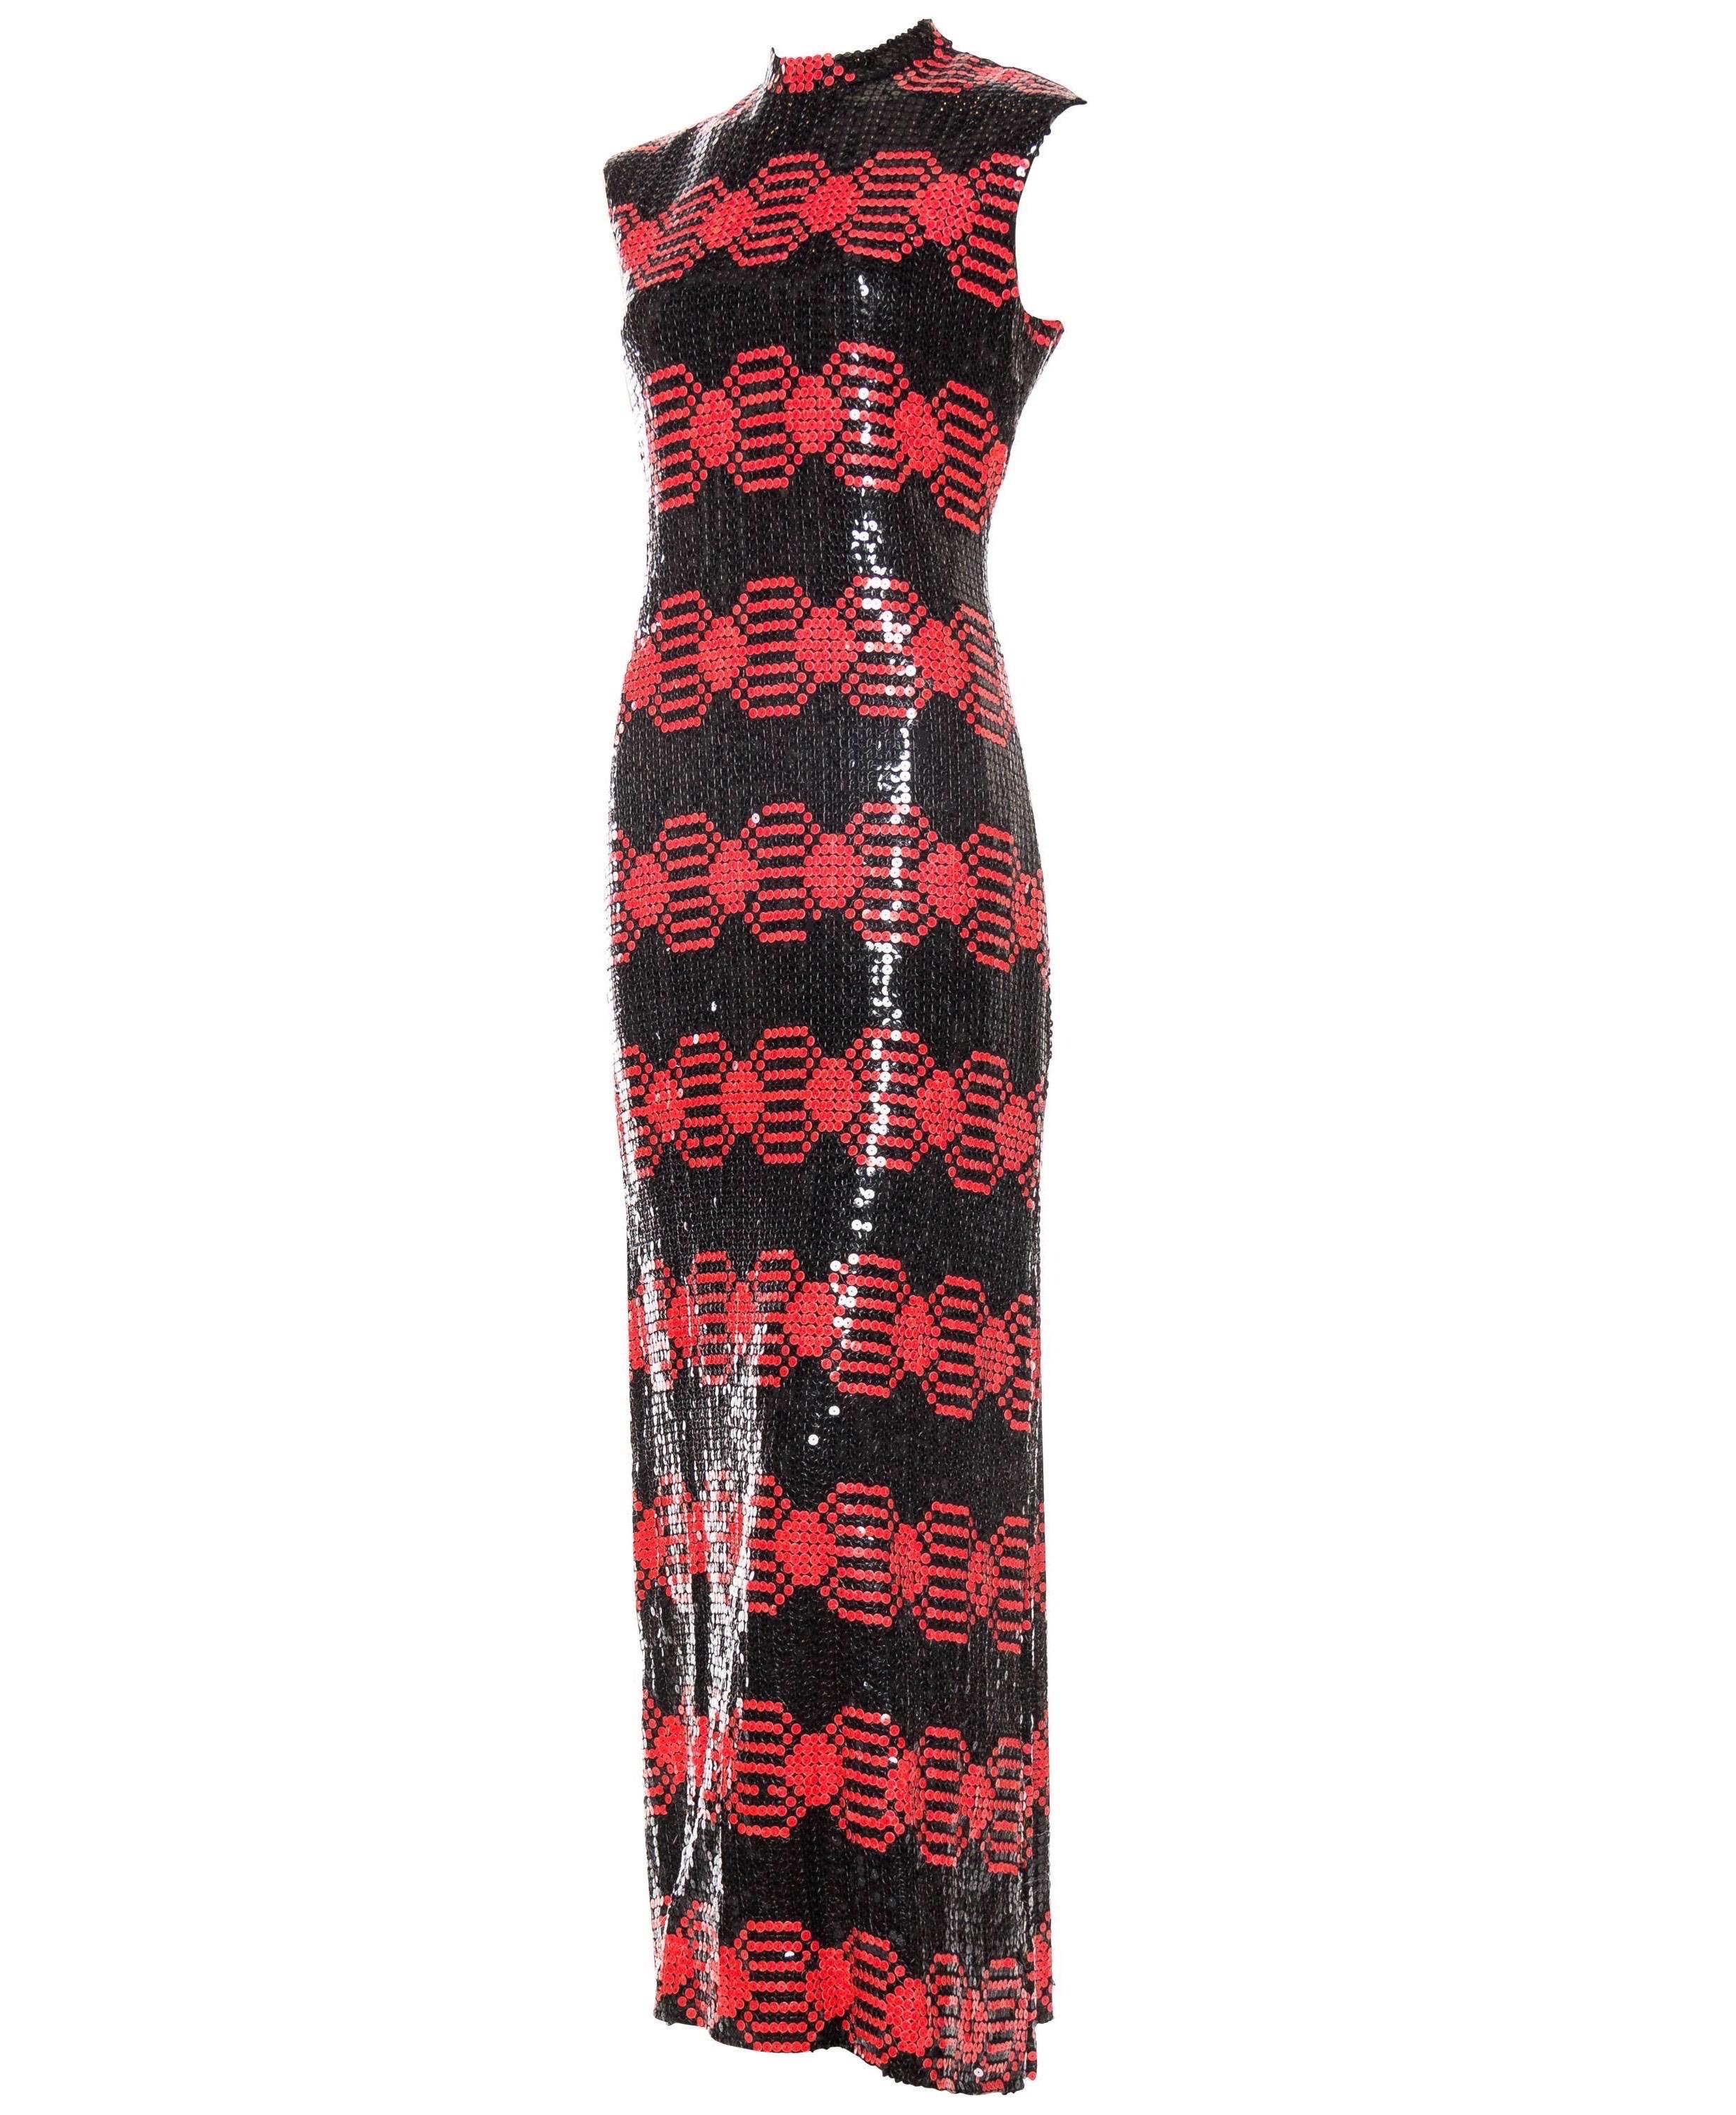 Fully lined in Rayon. 1960S ADELE SIMPSON Black & Red Silk Chiffon Oil Slick Op-Art Geometric Sequin Gown 